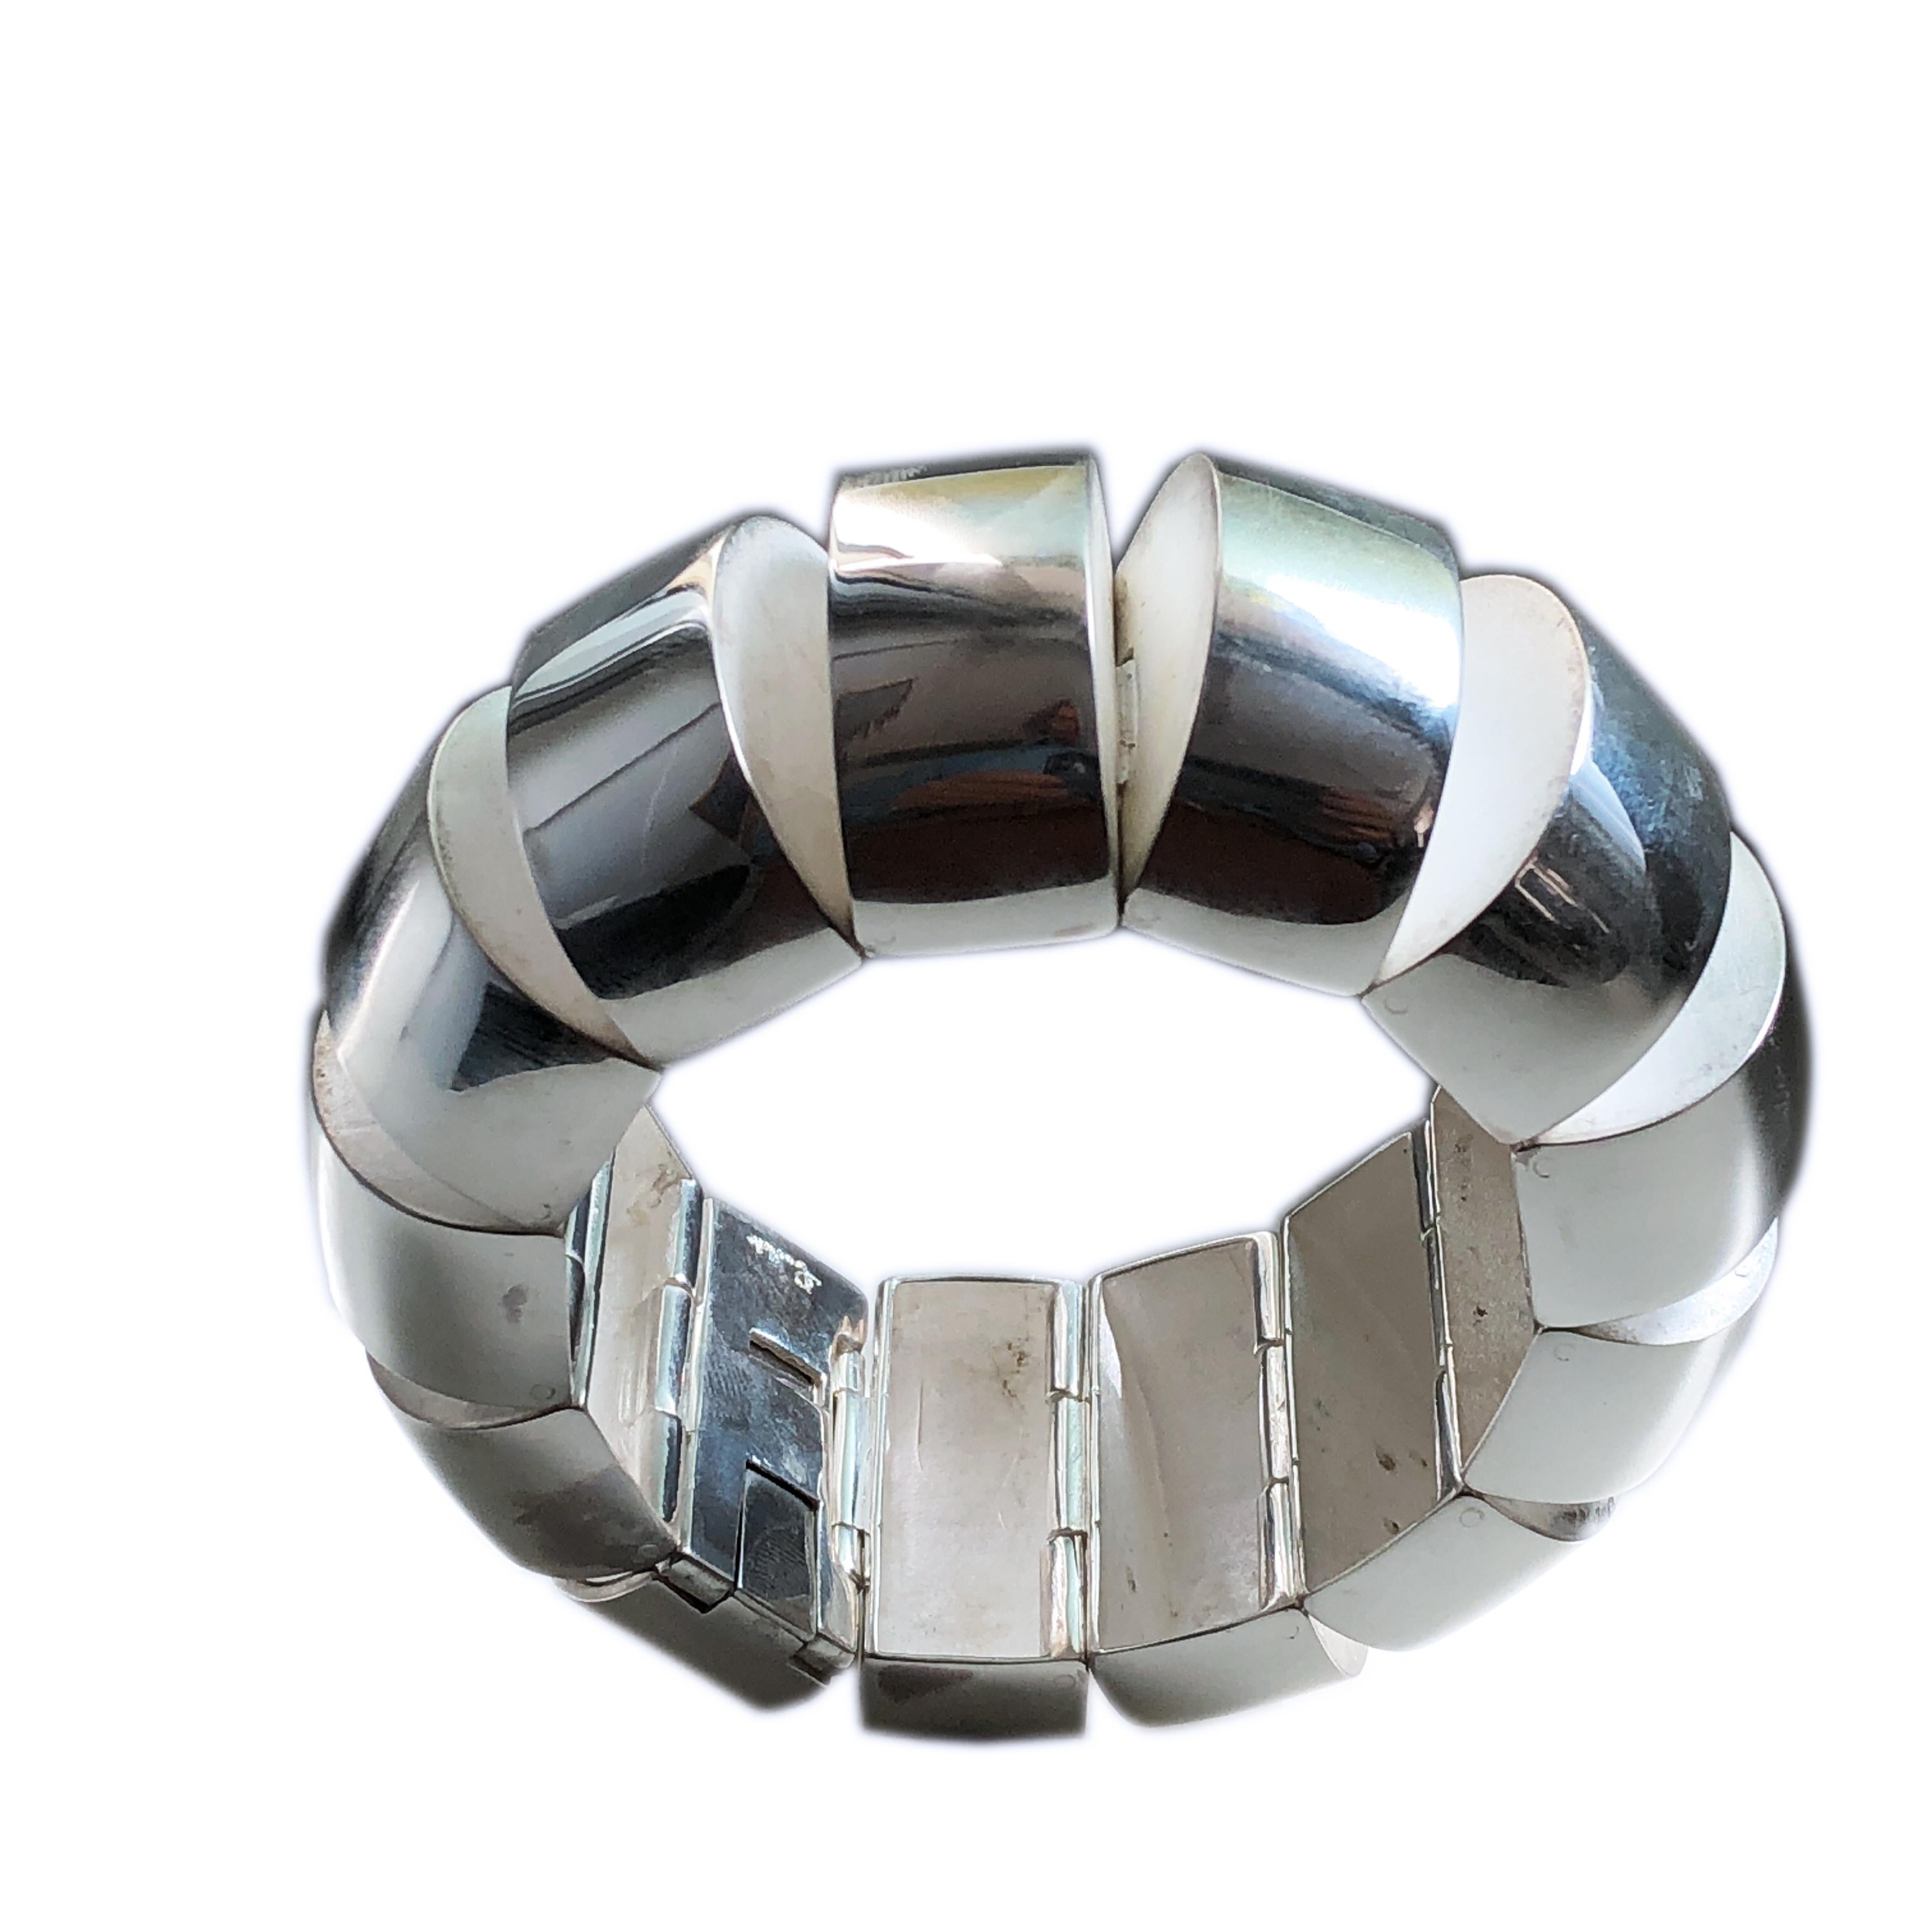 Extremely Rare, Chic and Timeless Sterling Silver Pomellato Bracelet: less than ten pieces of this Complicated, Sculptural Model were Hand Crafted in Pomellato Atelier in 1981. 
This one-of-a-kind piece comes from a Pomellato Collector's and it is